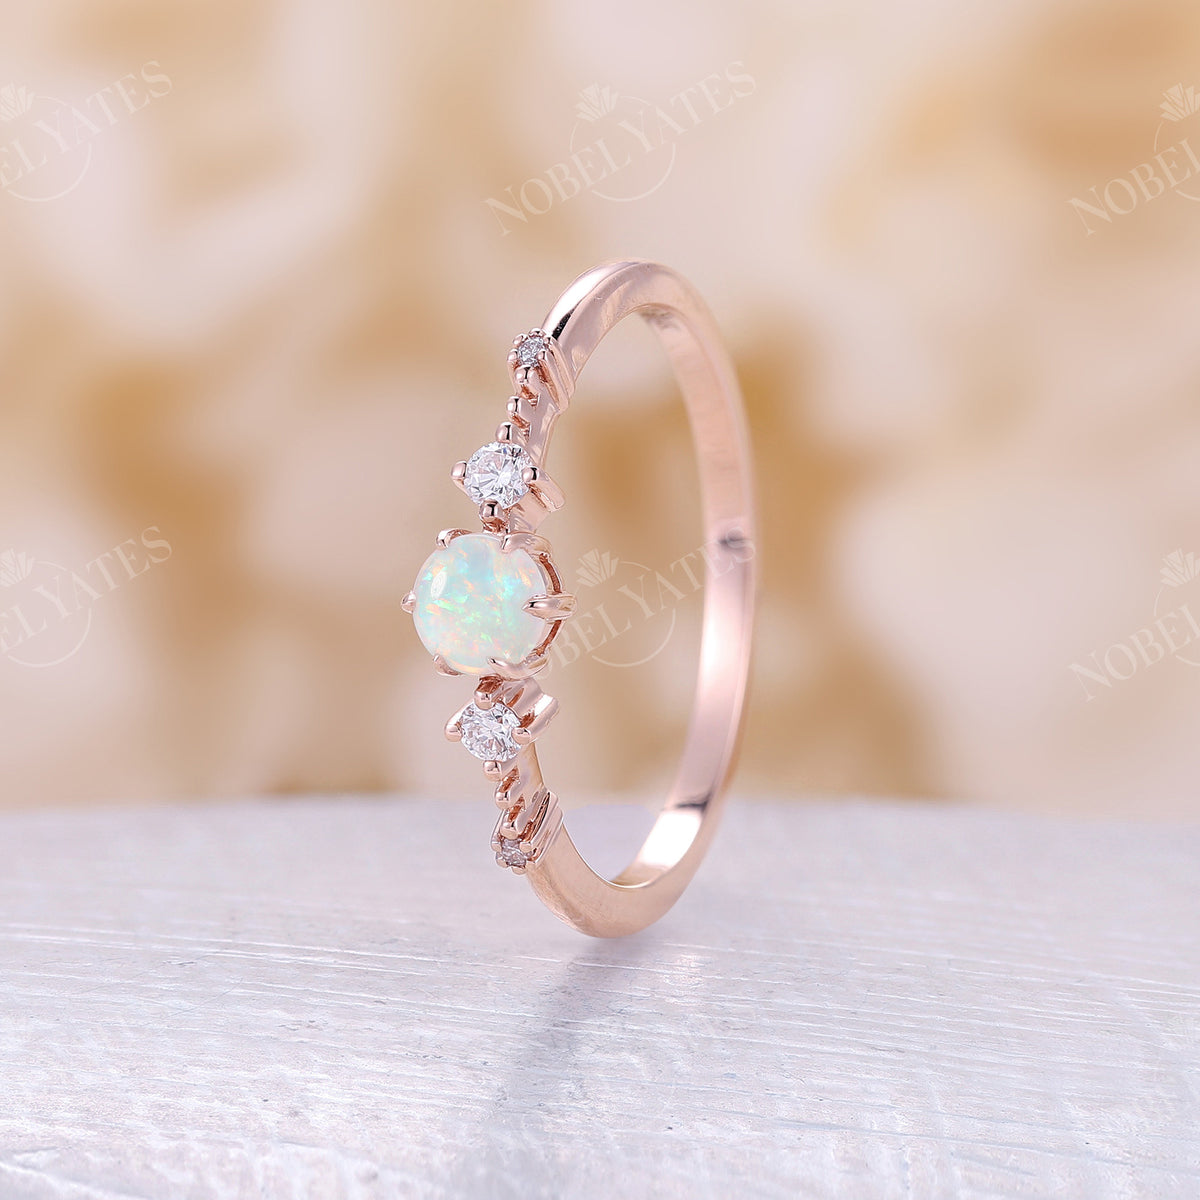 Round White Opal Vintage Rose Gold Engagement Ring